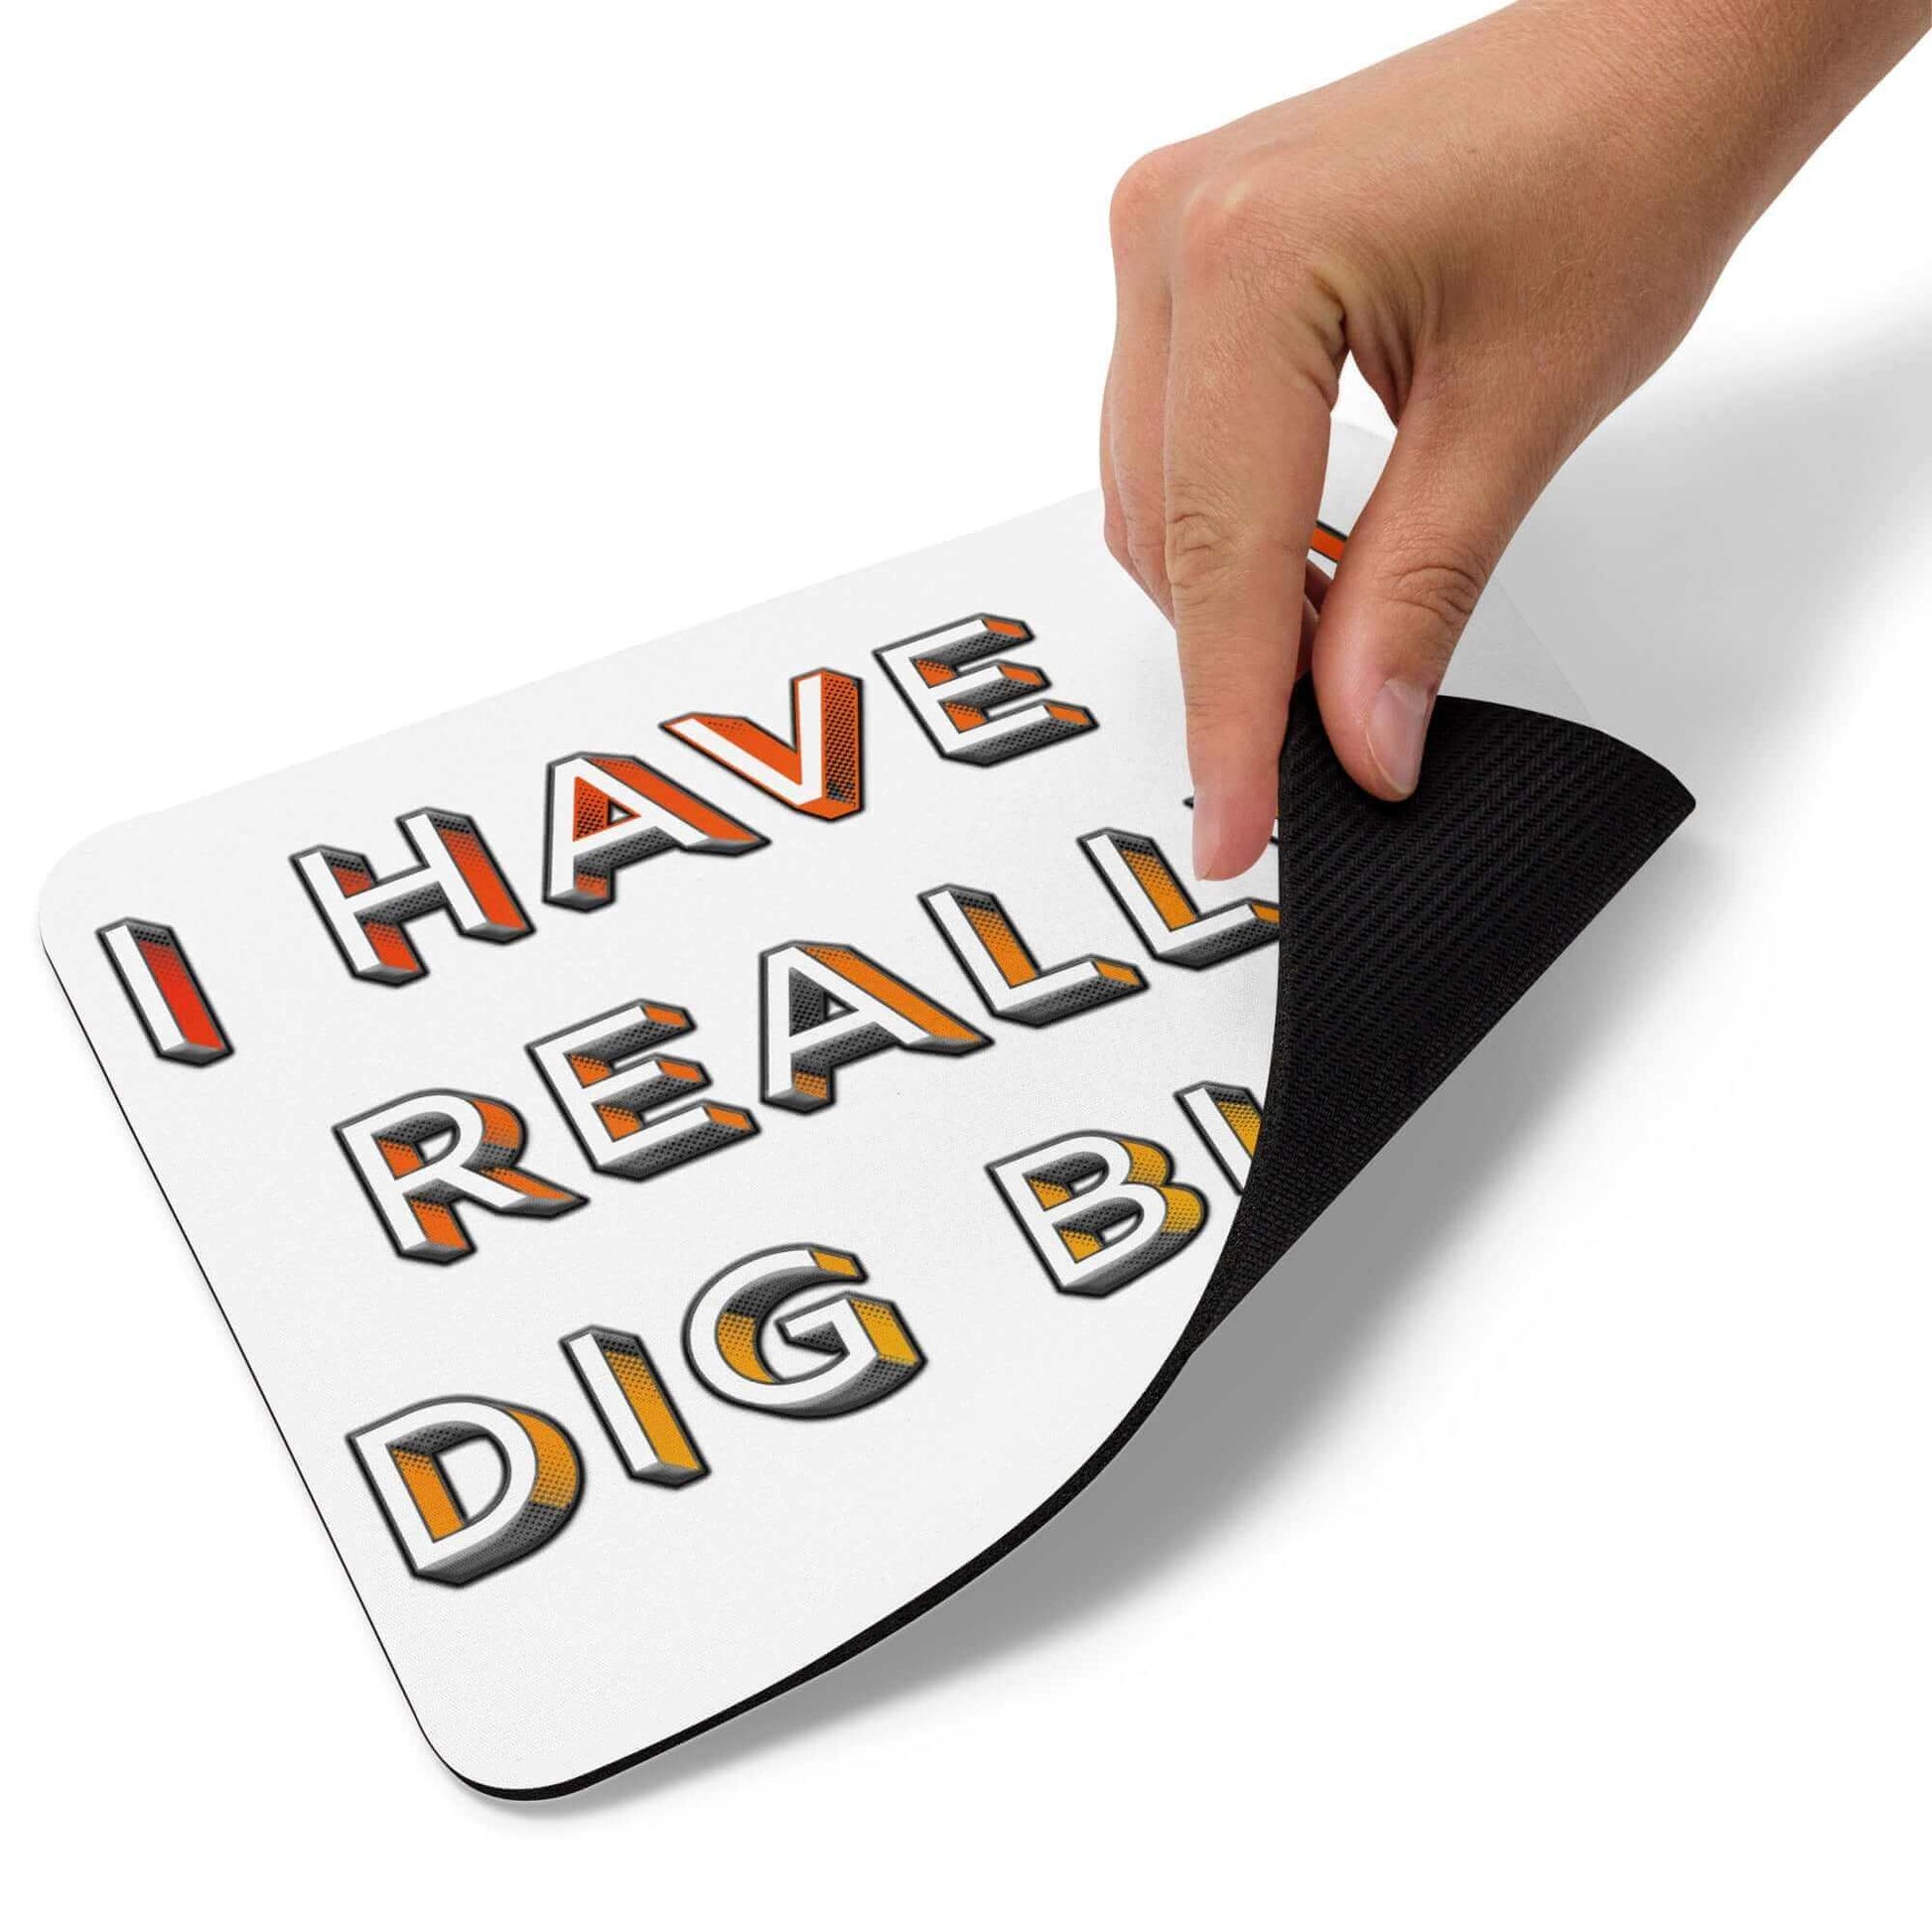 I have a really dig bick - Mouse pad - Horrible Designs